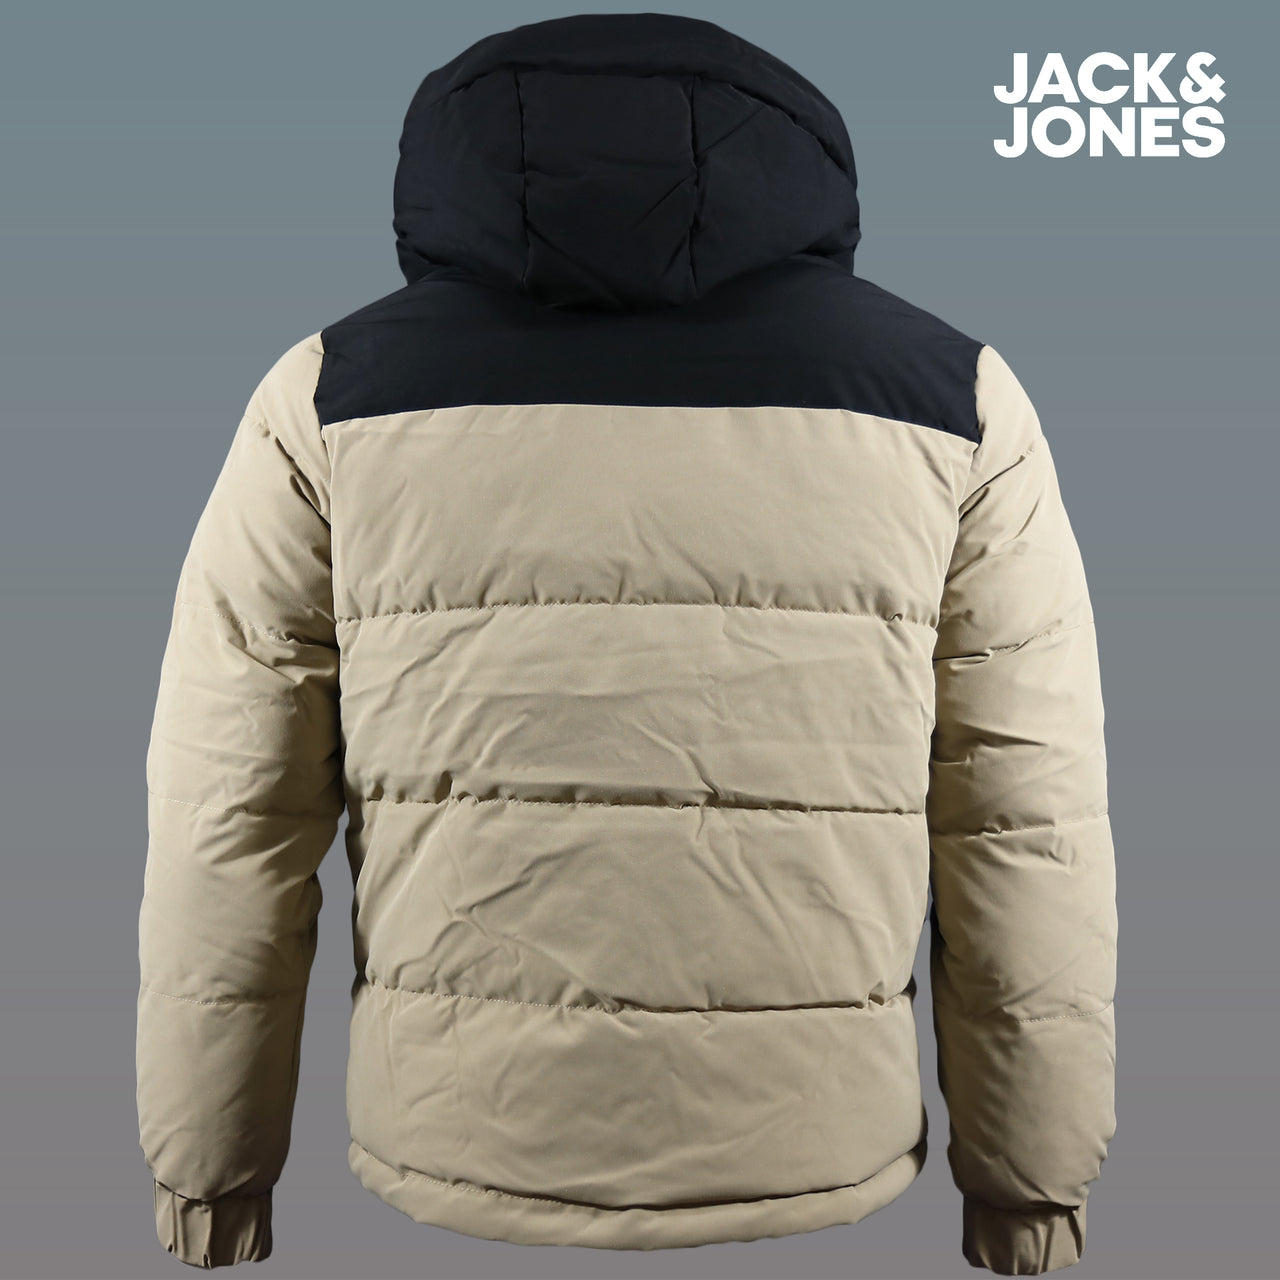 The backside of the Jack And Jones Dune Puffer Jacket With Hidden Pocket | Black and Tan Puffer Jacket